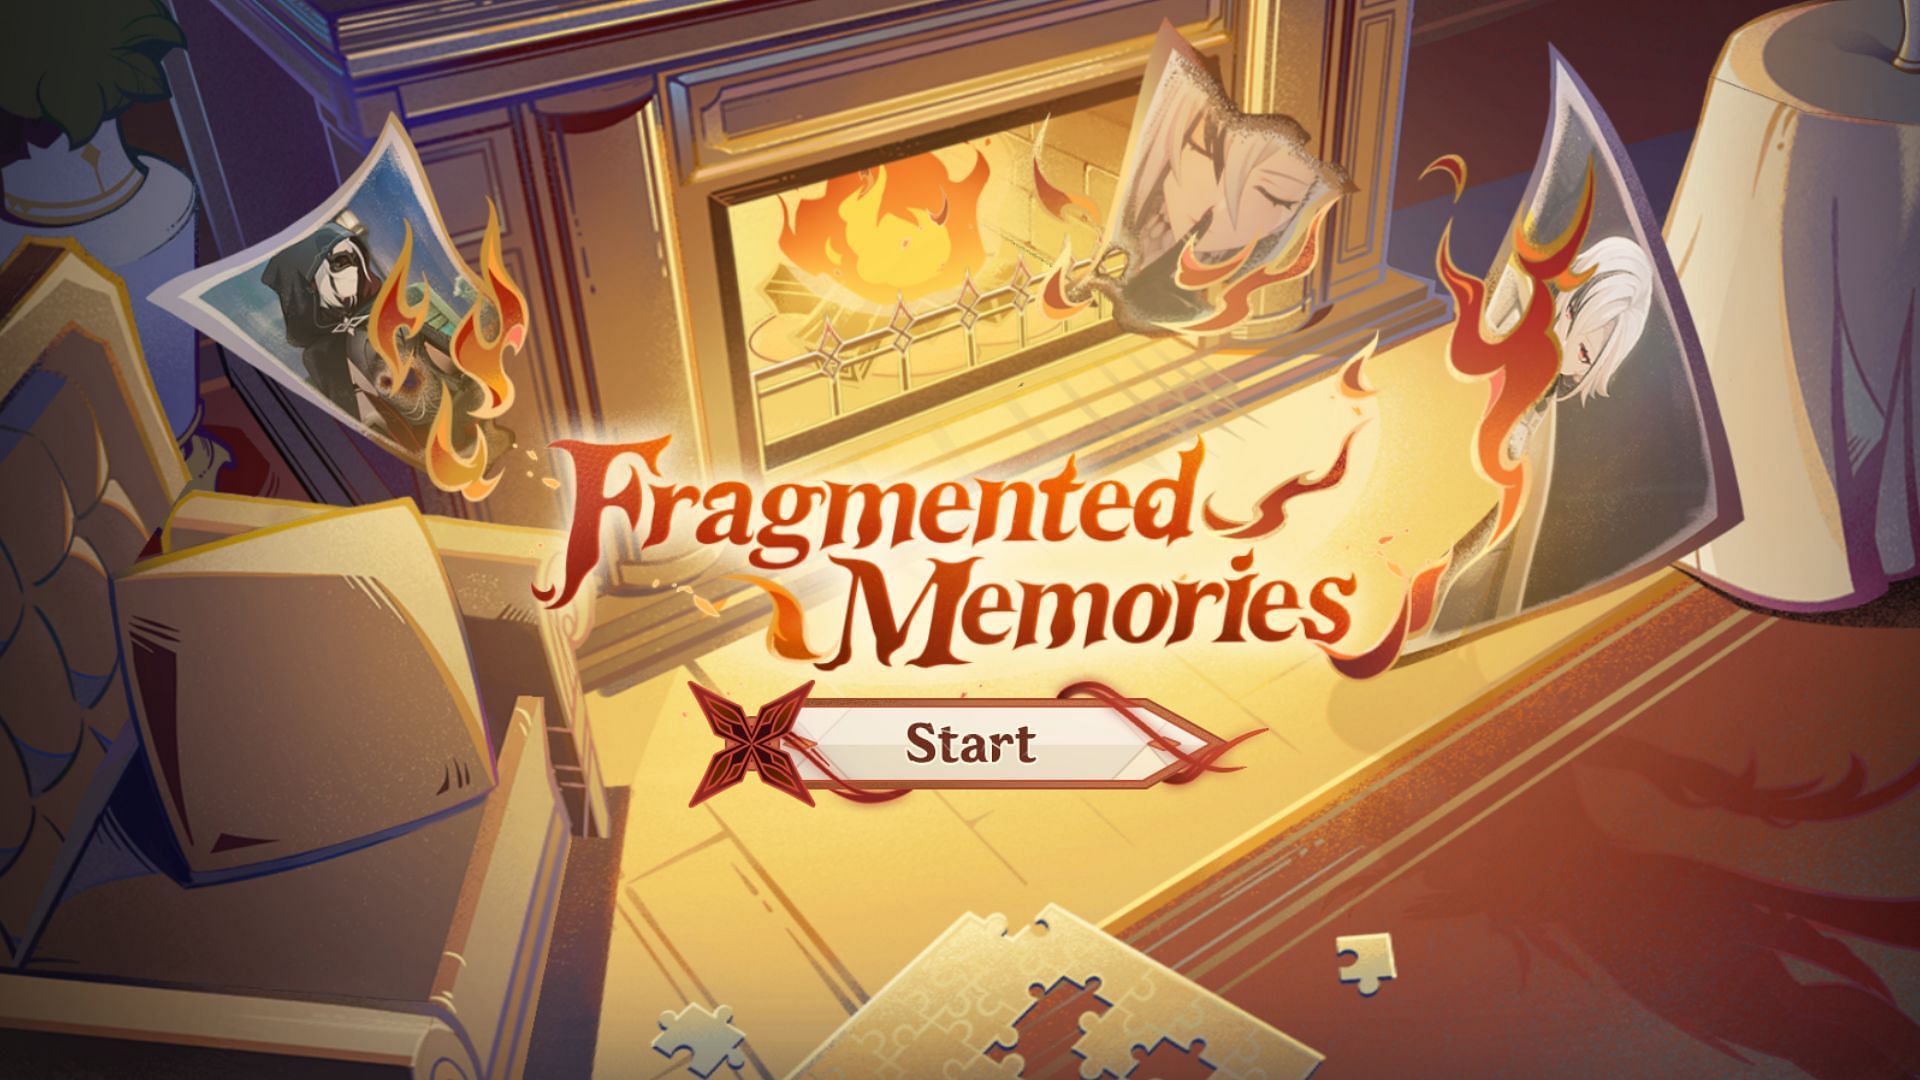 Guide to Fragmented Memories web event (Image via HoYoverse)